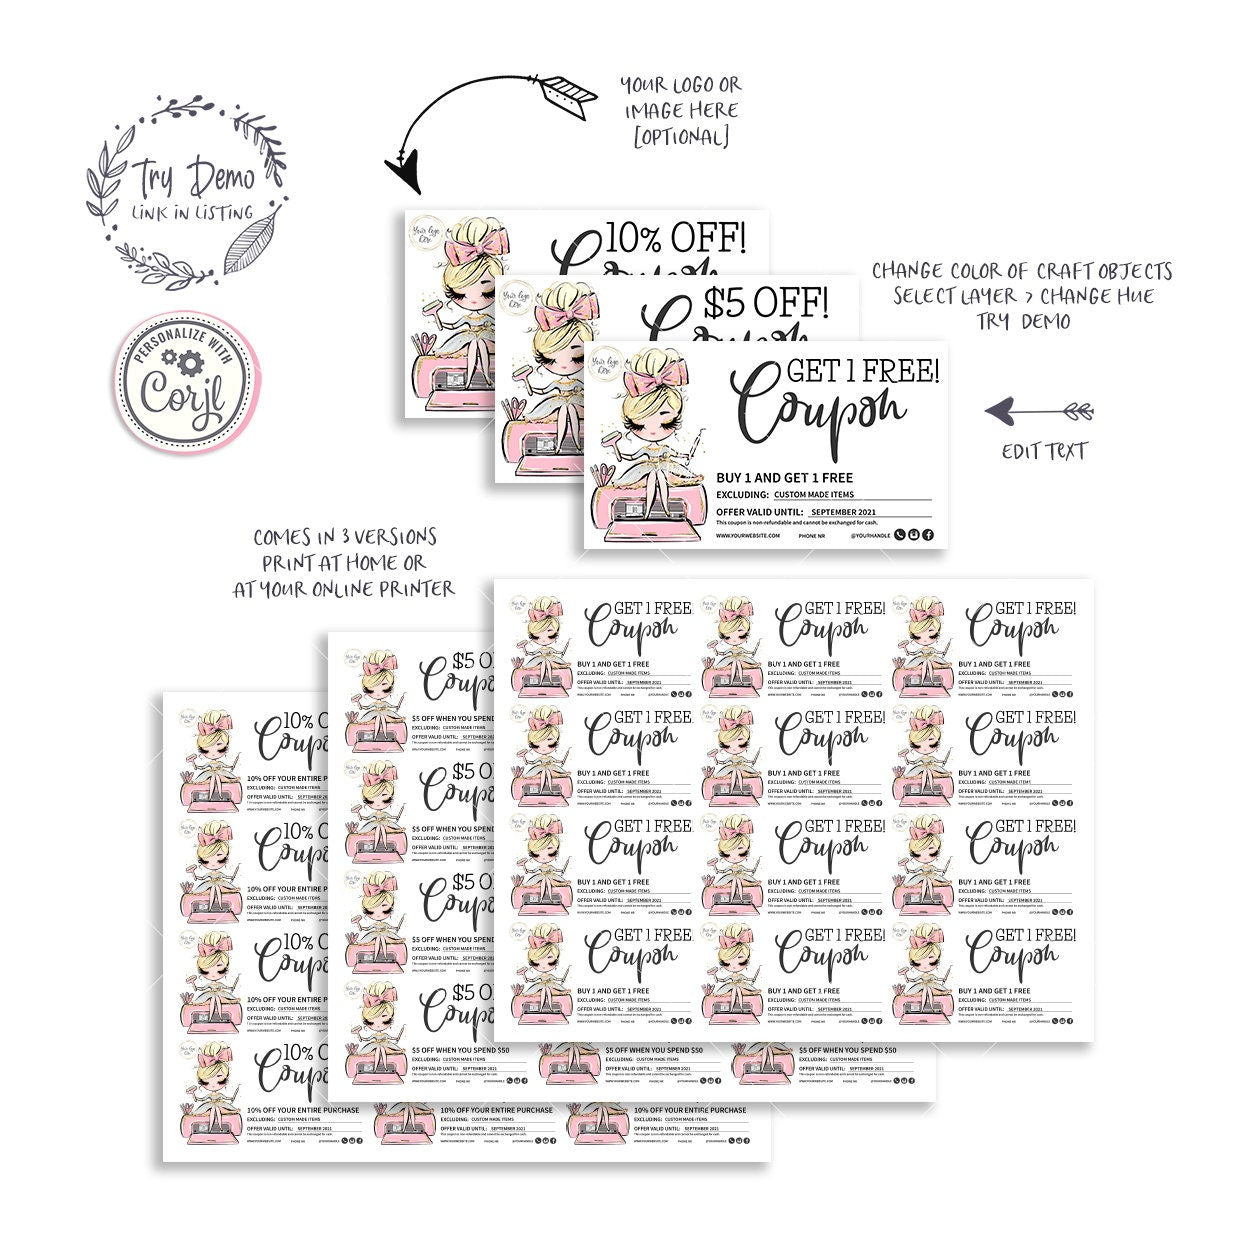 Handcrafter Business Coupons, Crafter Shop Gift Cards, Blond Hair, Fair Skin - Candy Jar Studios